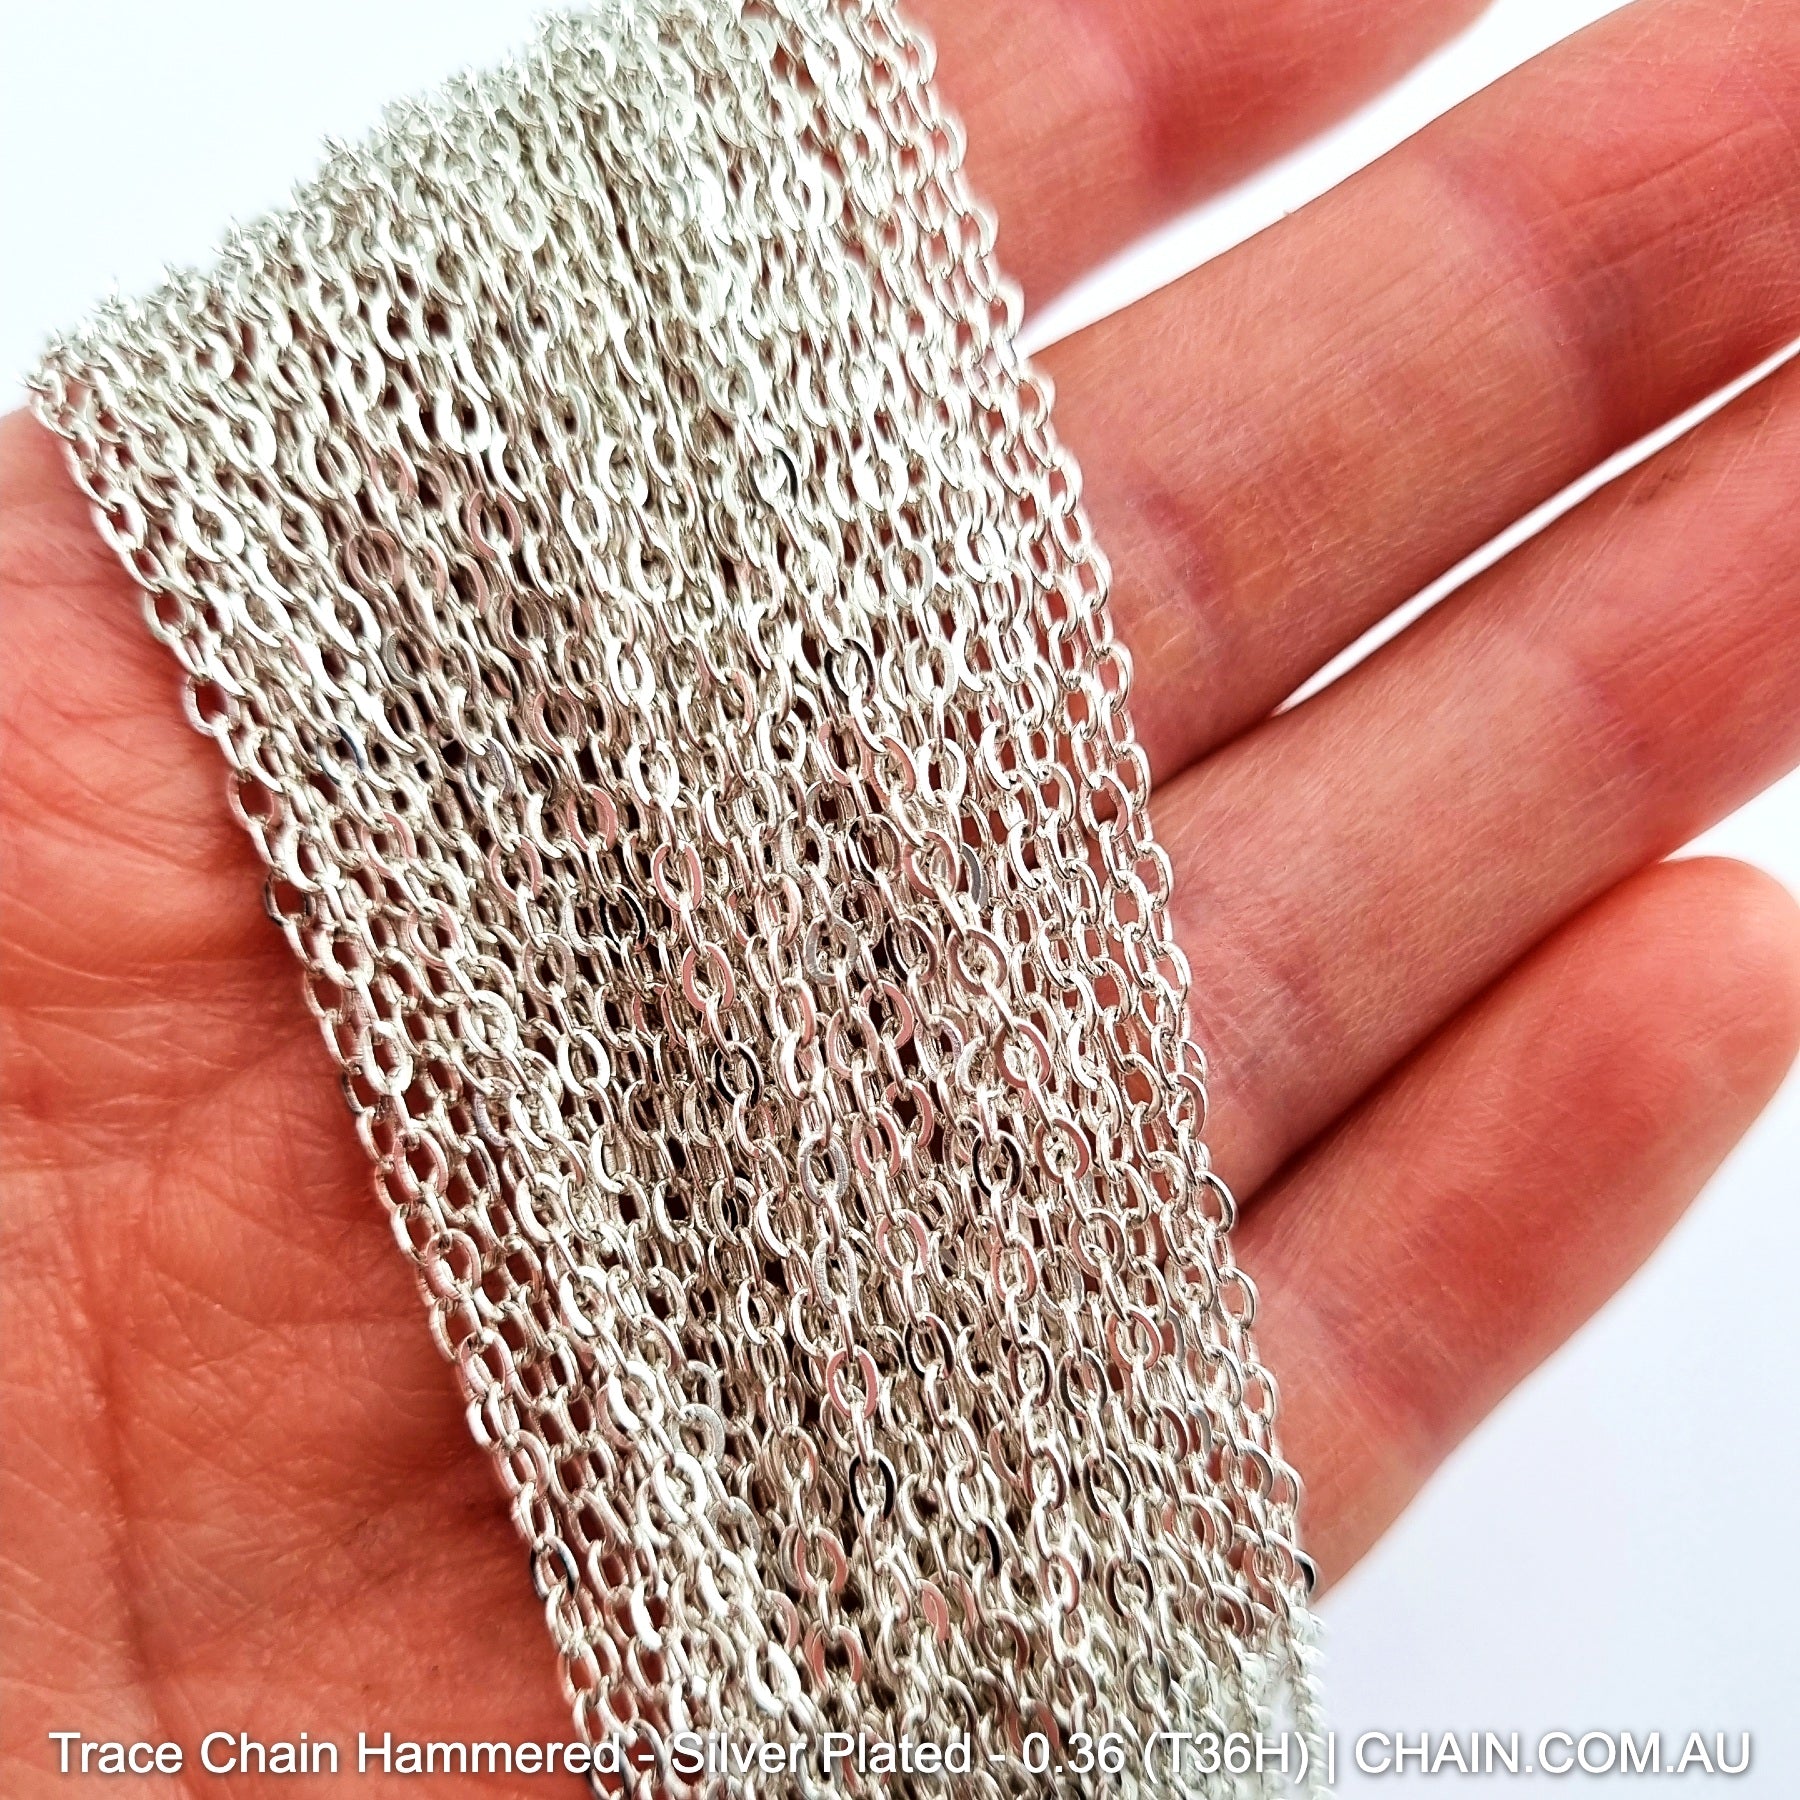 Hammered Trace Chain in a Silver Plated Finish. Size: 0.36mm, T36H. Jewellery Chain, Australia wide shipping. Shop chain.com.au